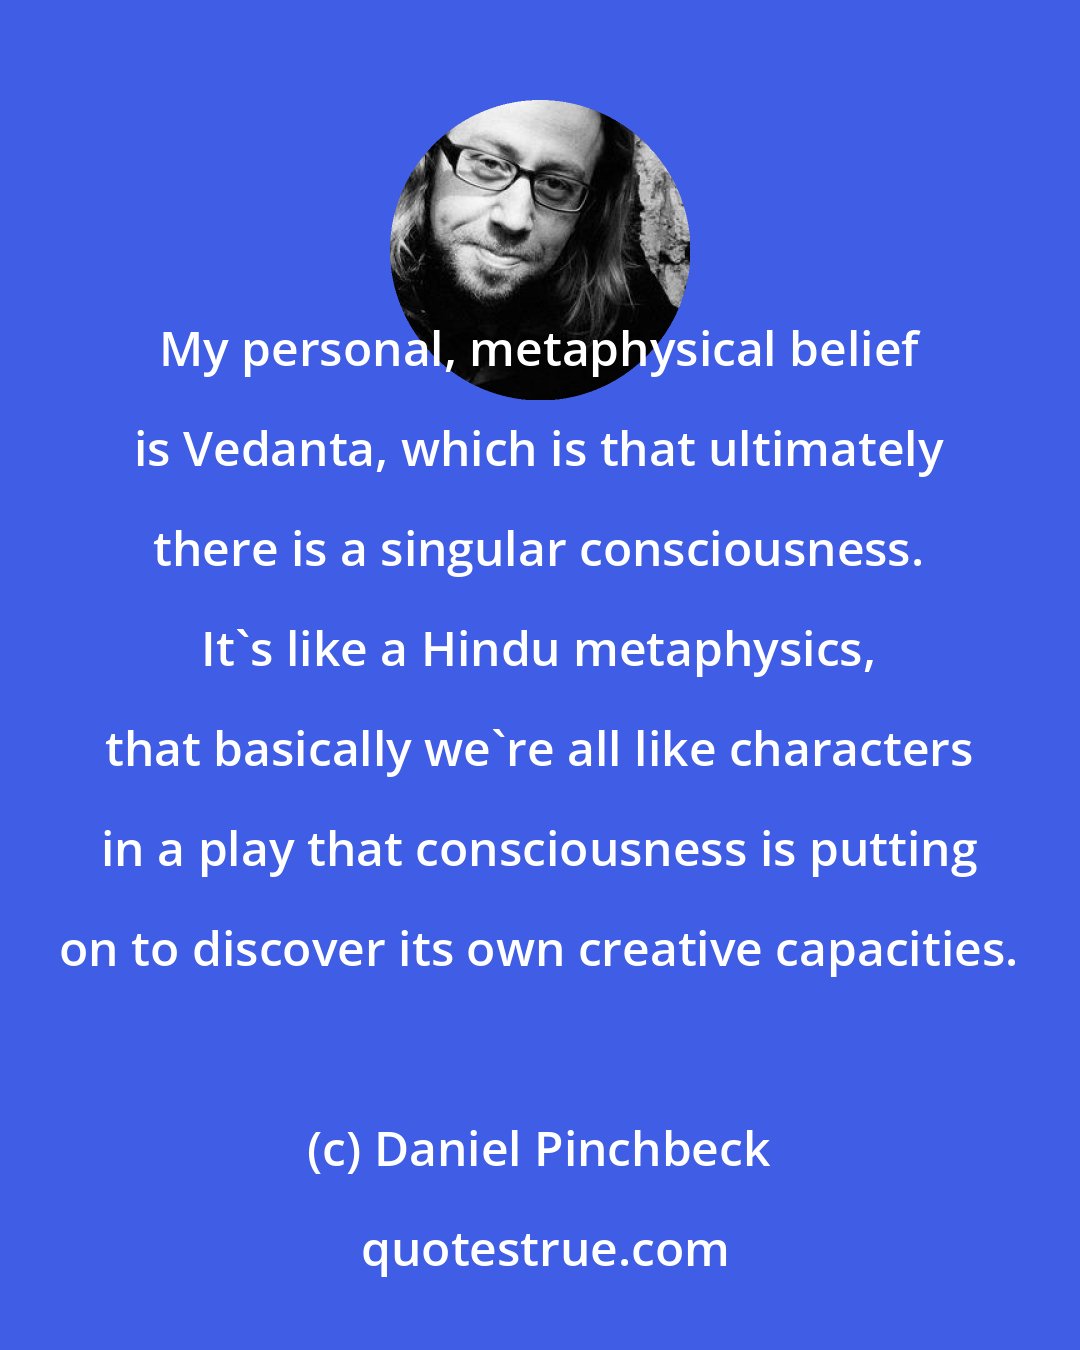 Daniel Pinchbeck: My personal, metaphysical belief is Vedanta, which is that ultimately there is a singular consciousness. It's like a Hindu metaphysics, that basically we're all like characters in a play that consciousness is putting on to discover its own creative capacities.